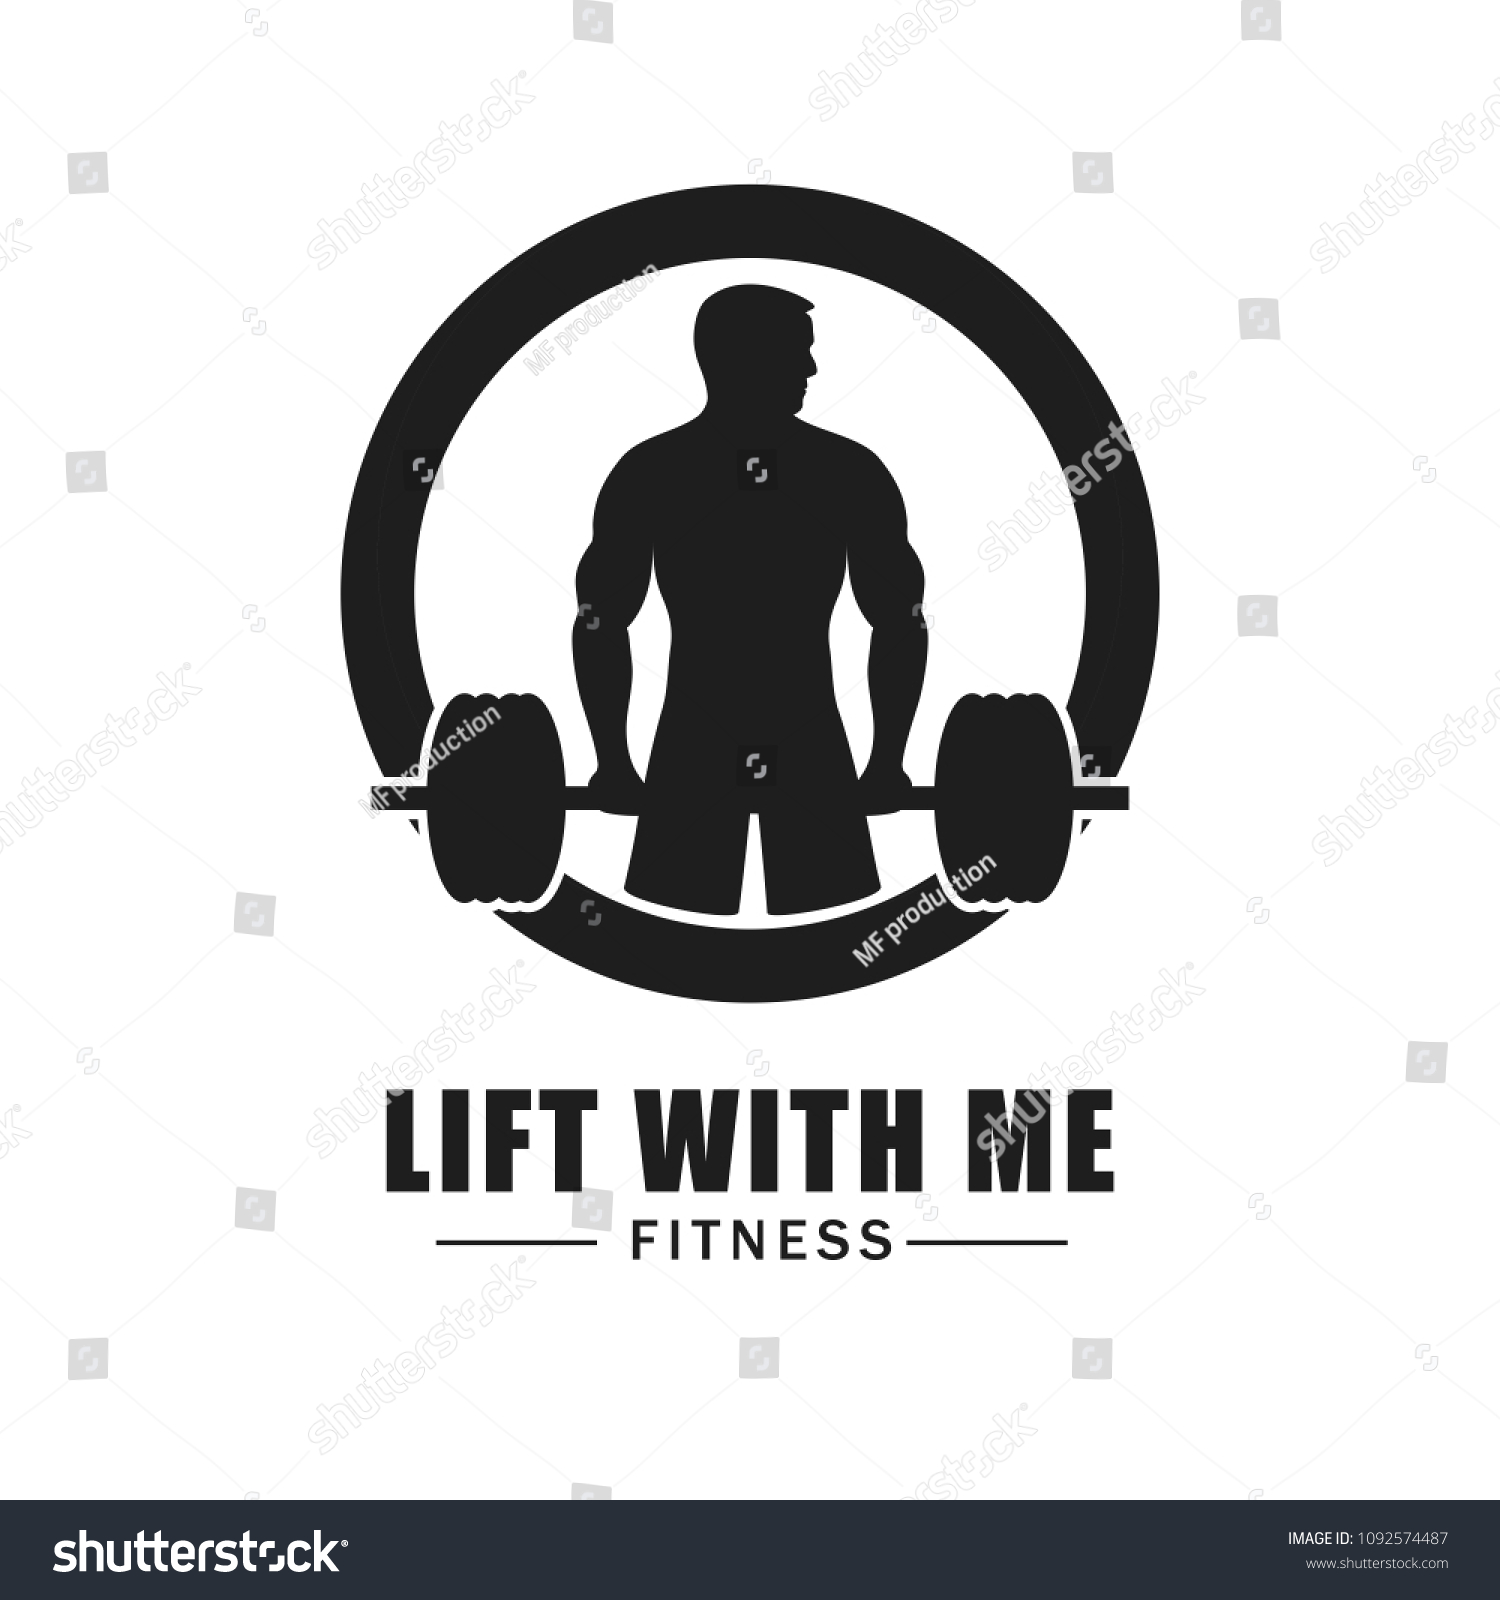 Fitness Logo Isolated On White Background Stock Image Download Now